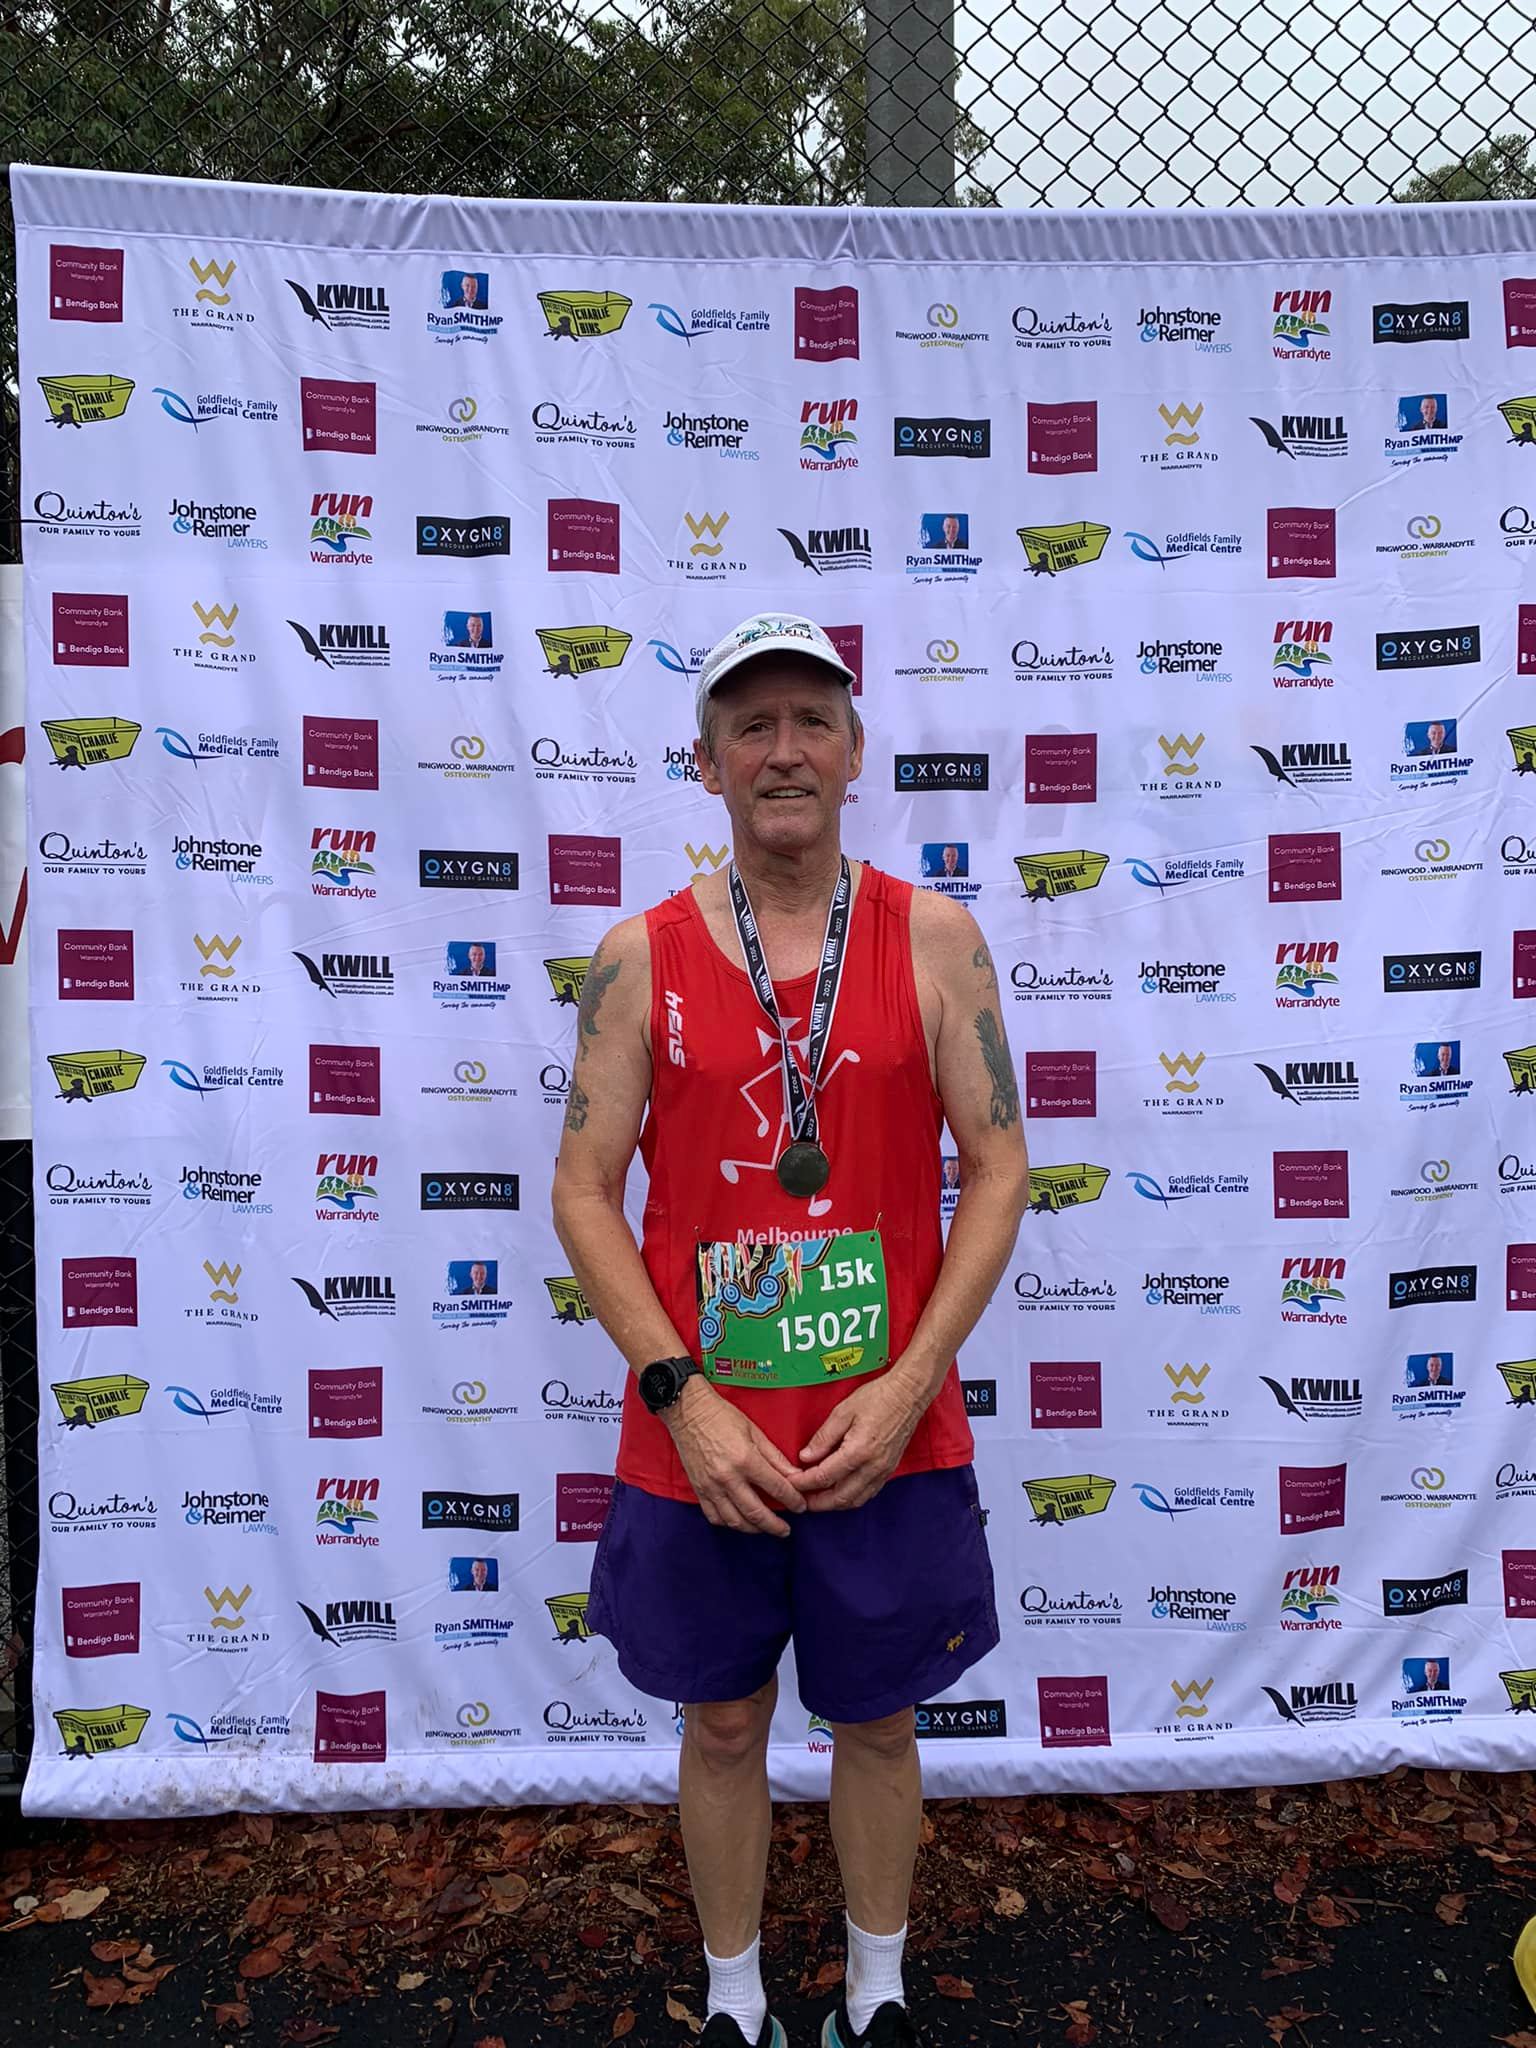 A runner in red singlet with a medal and a racing bib in front of a sign with the names of sponsors